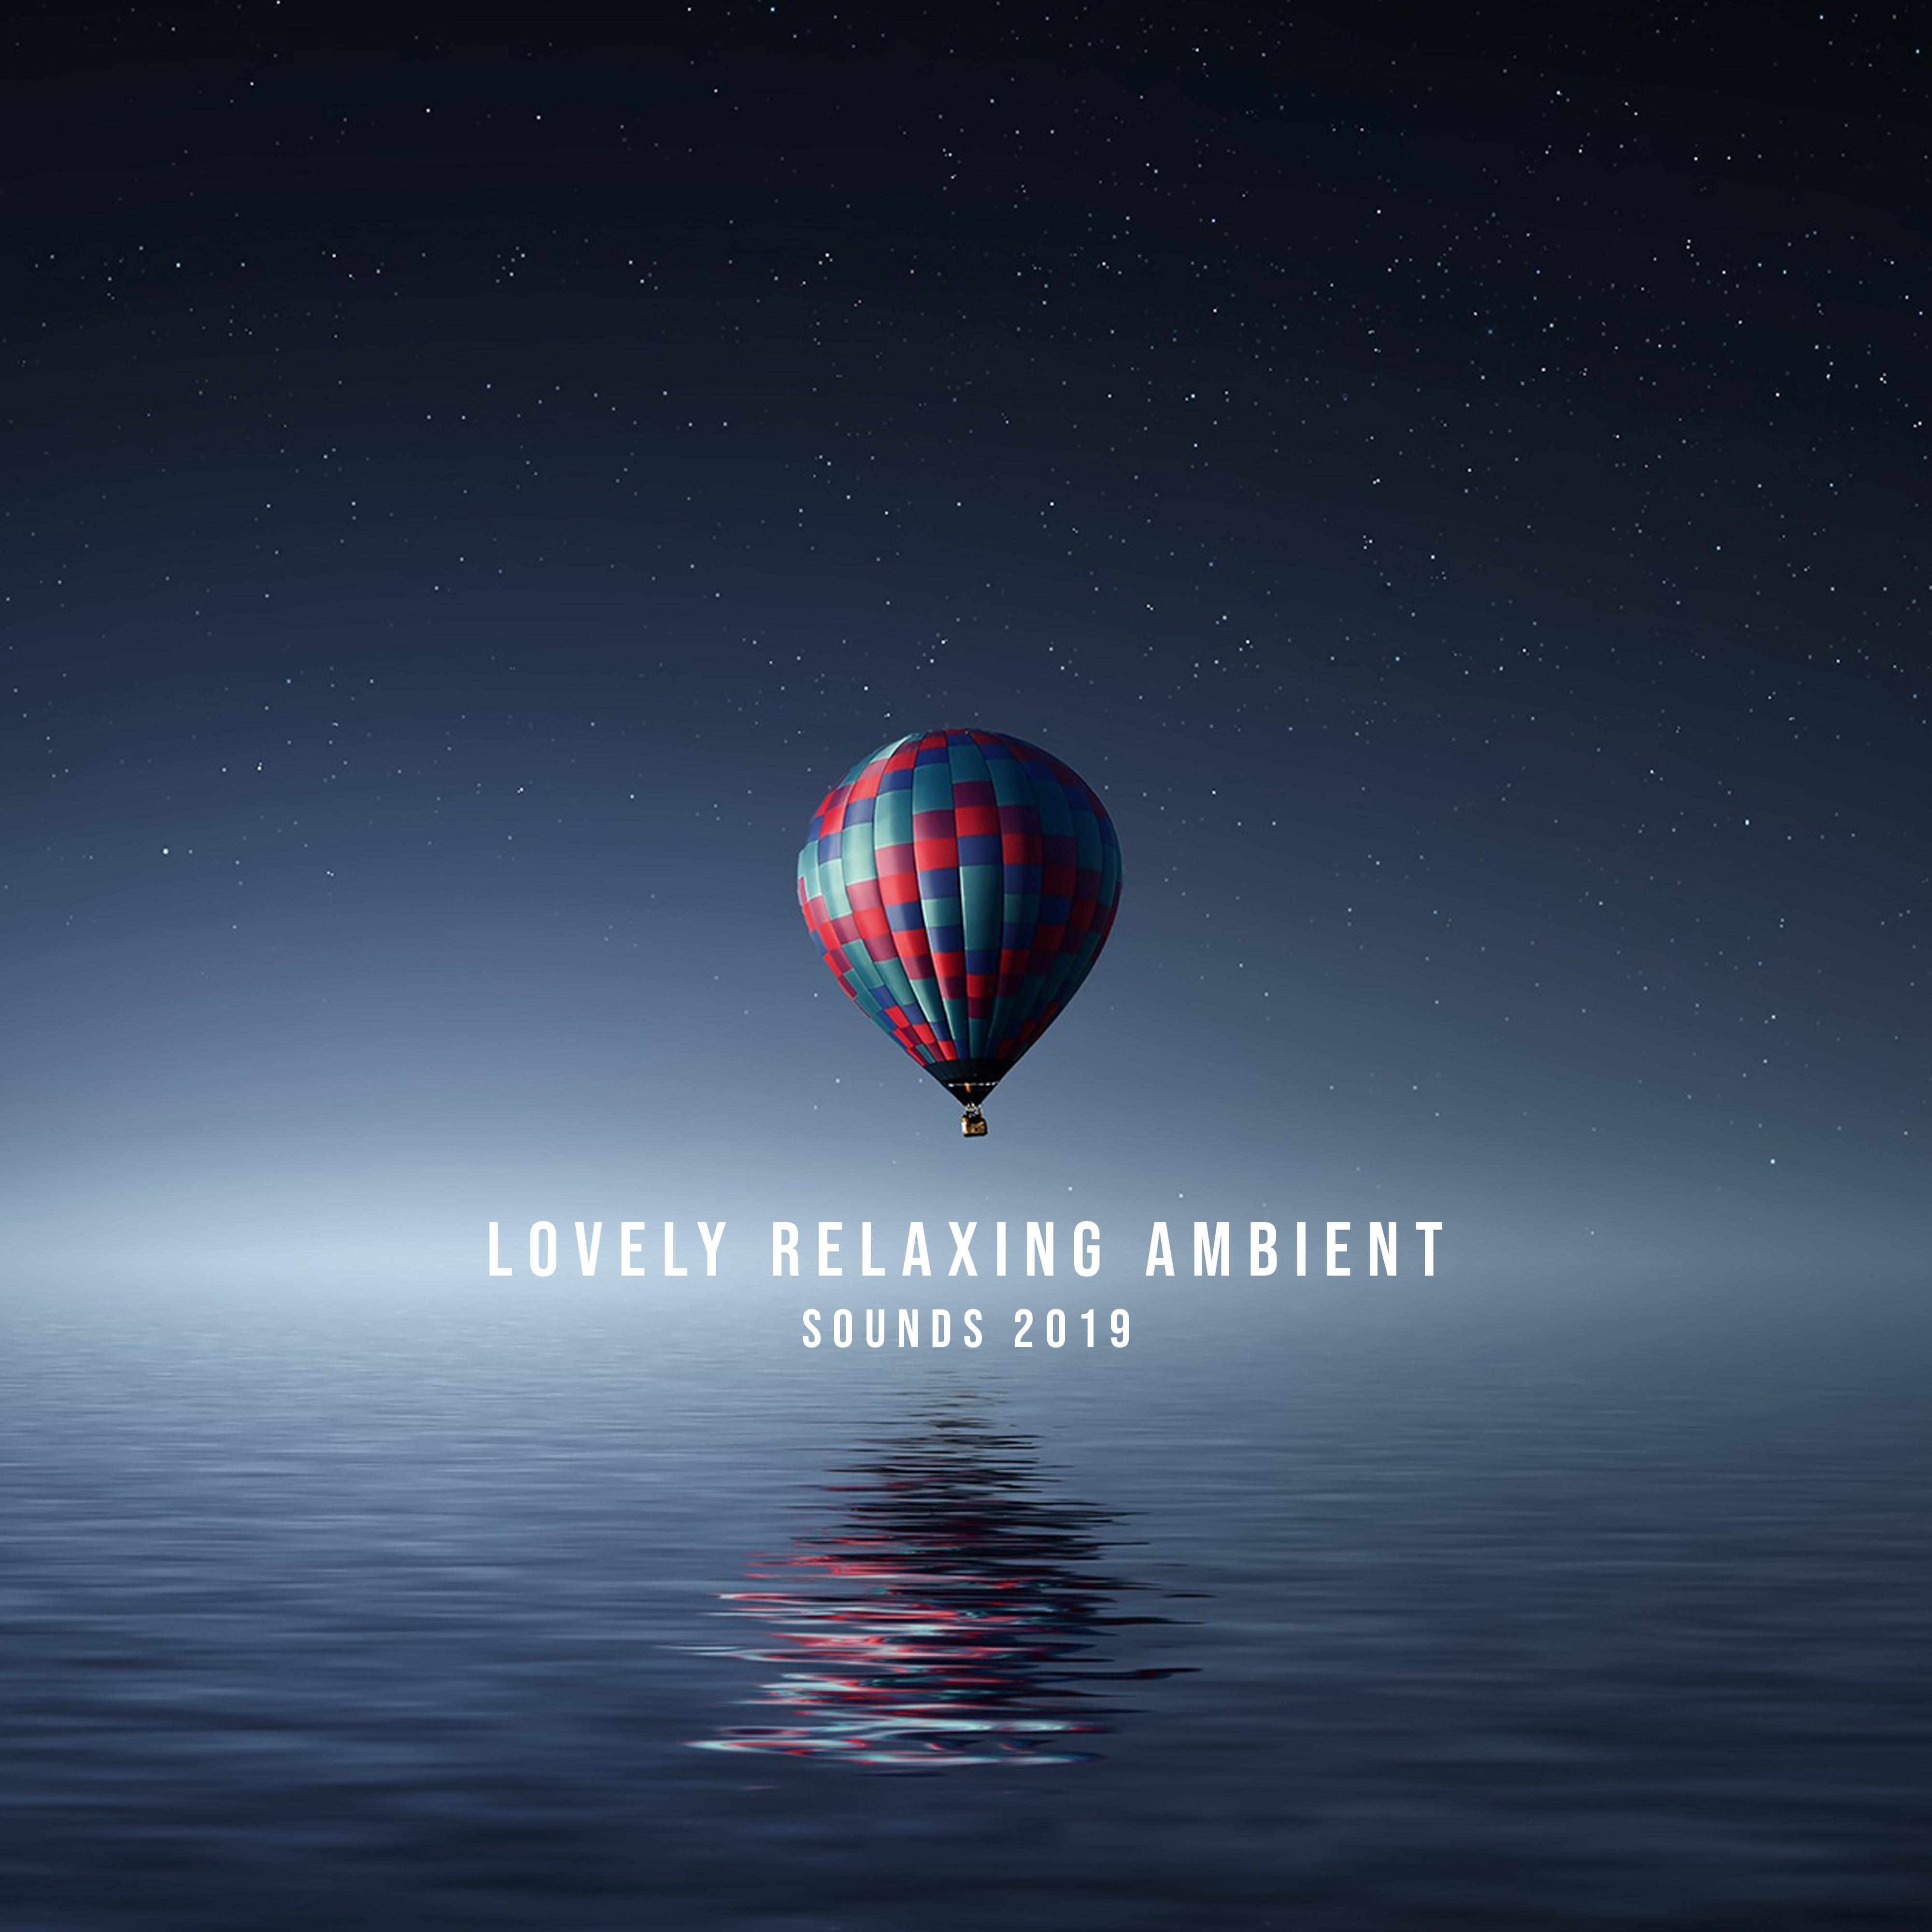 Lovely Relaxing Ambient Sounds 2019 – 15 New Age Songs for Total Relaxation, Calming Down, Stress Relief, Rest After Tough Day, Soothing Sounds of Violin, Sax & Many More